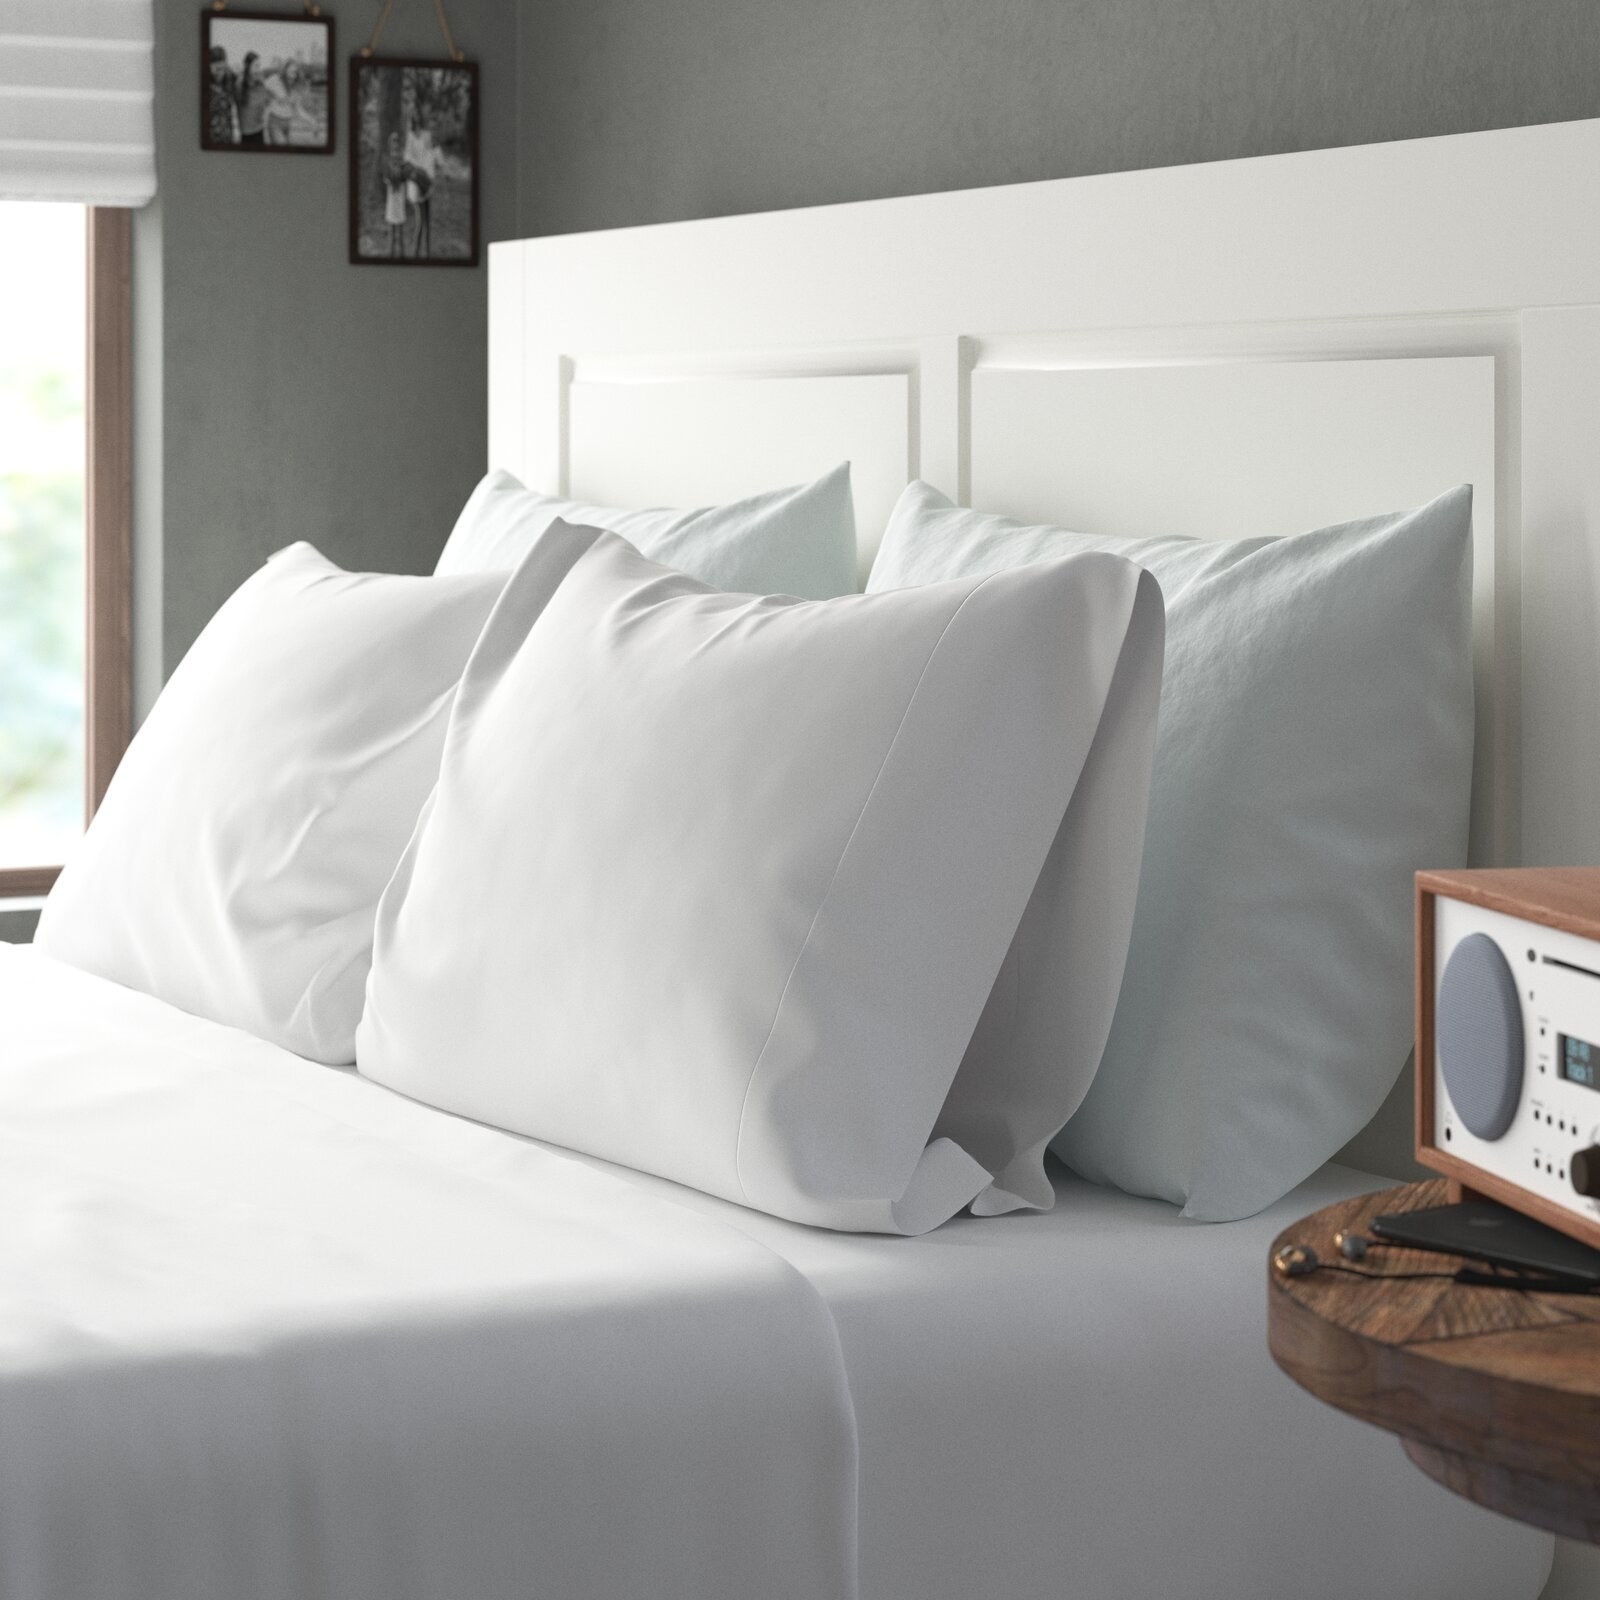 sheet set in white on a bed with four pillows and white headboard